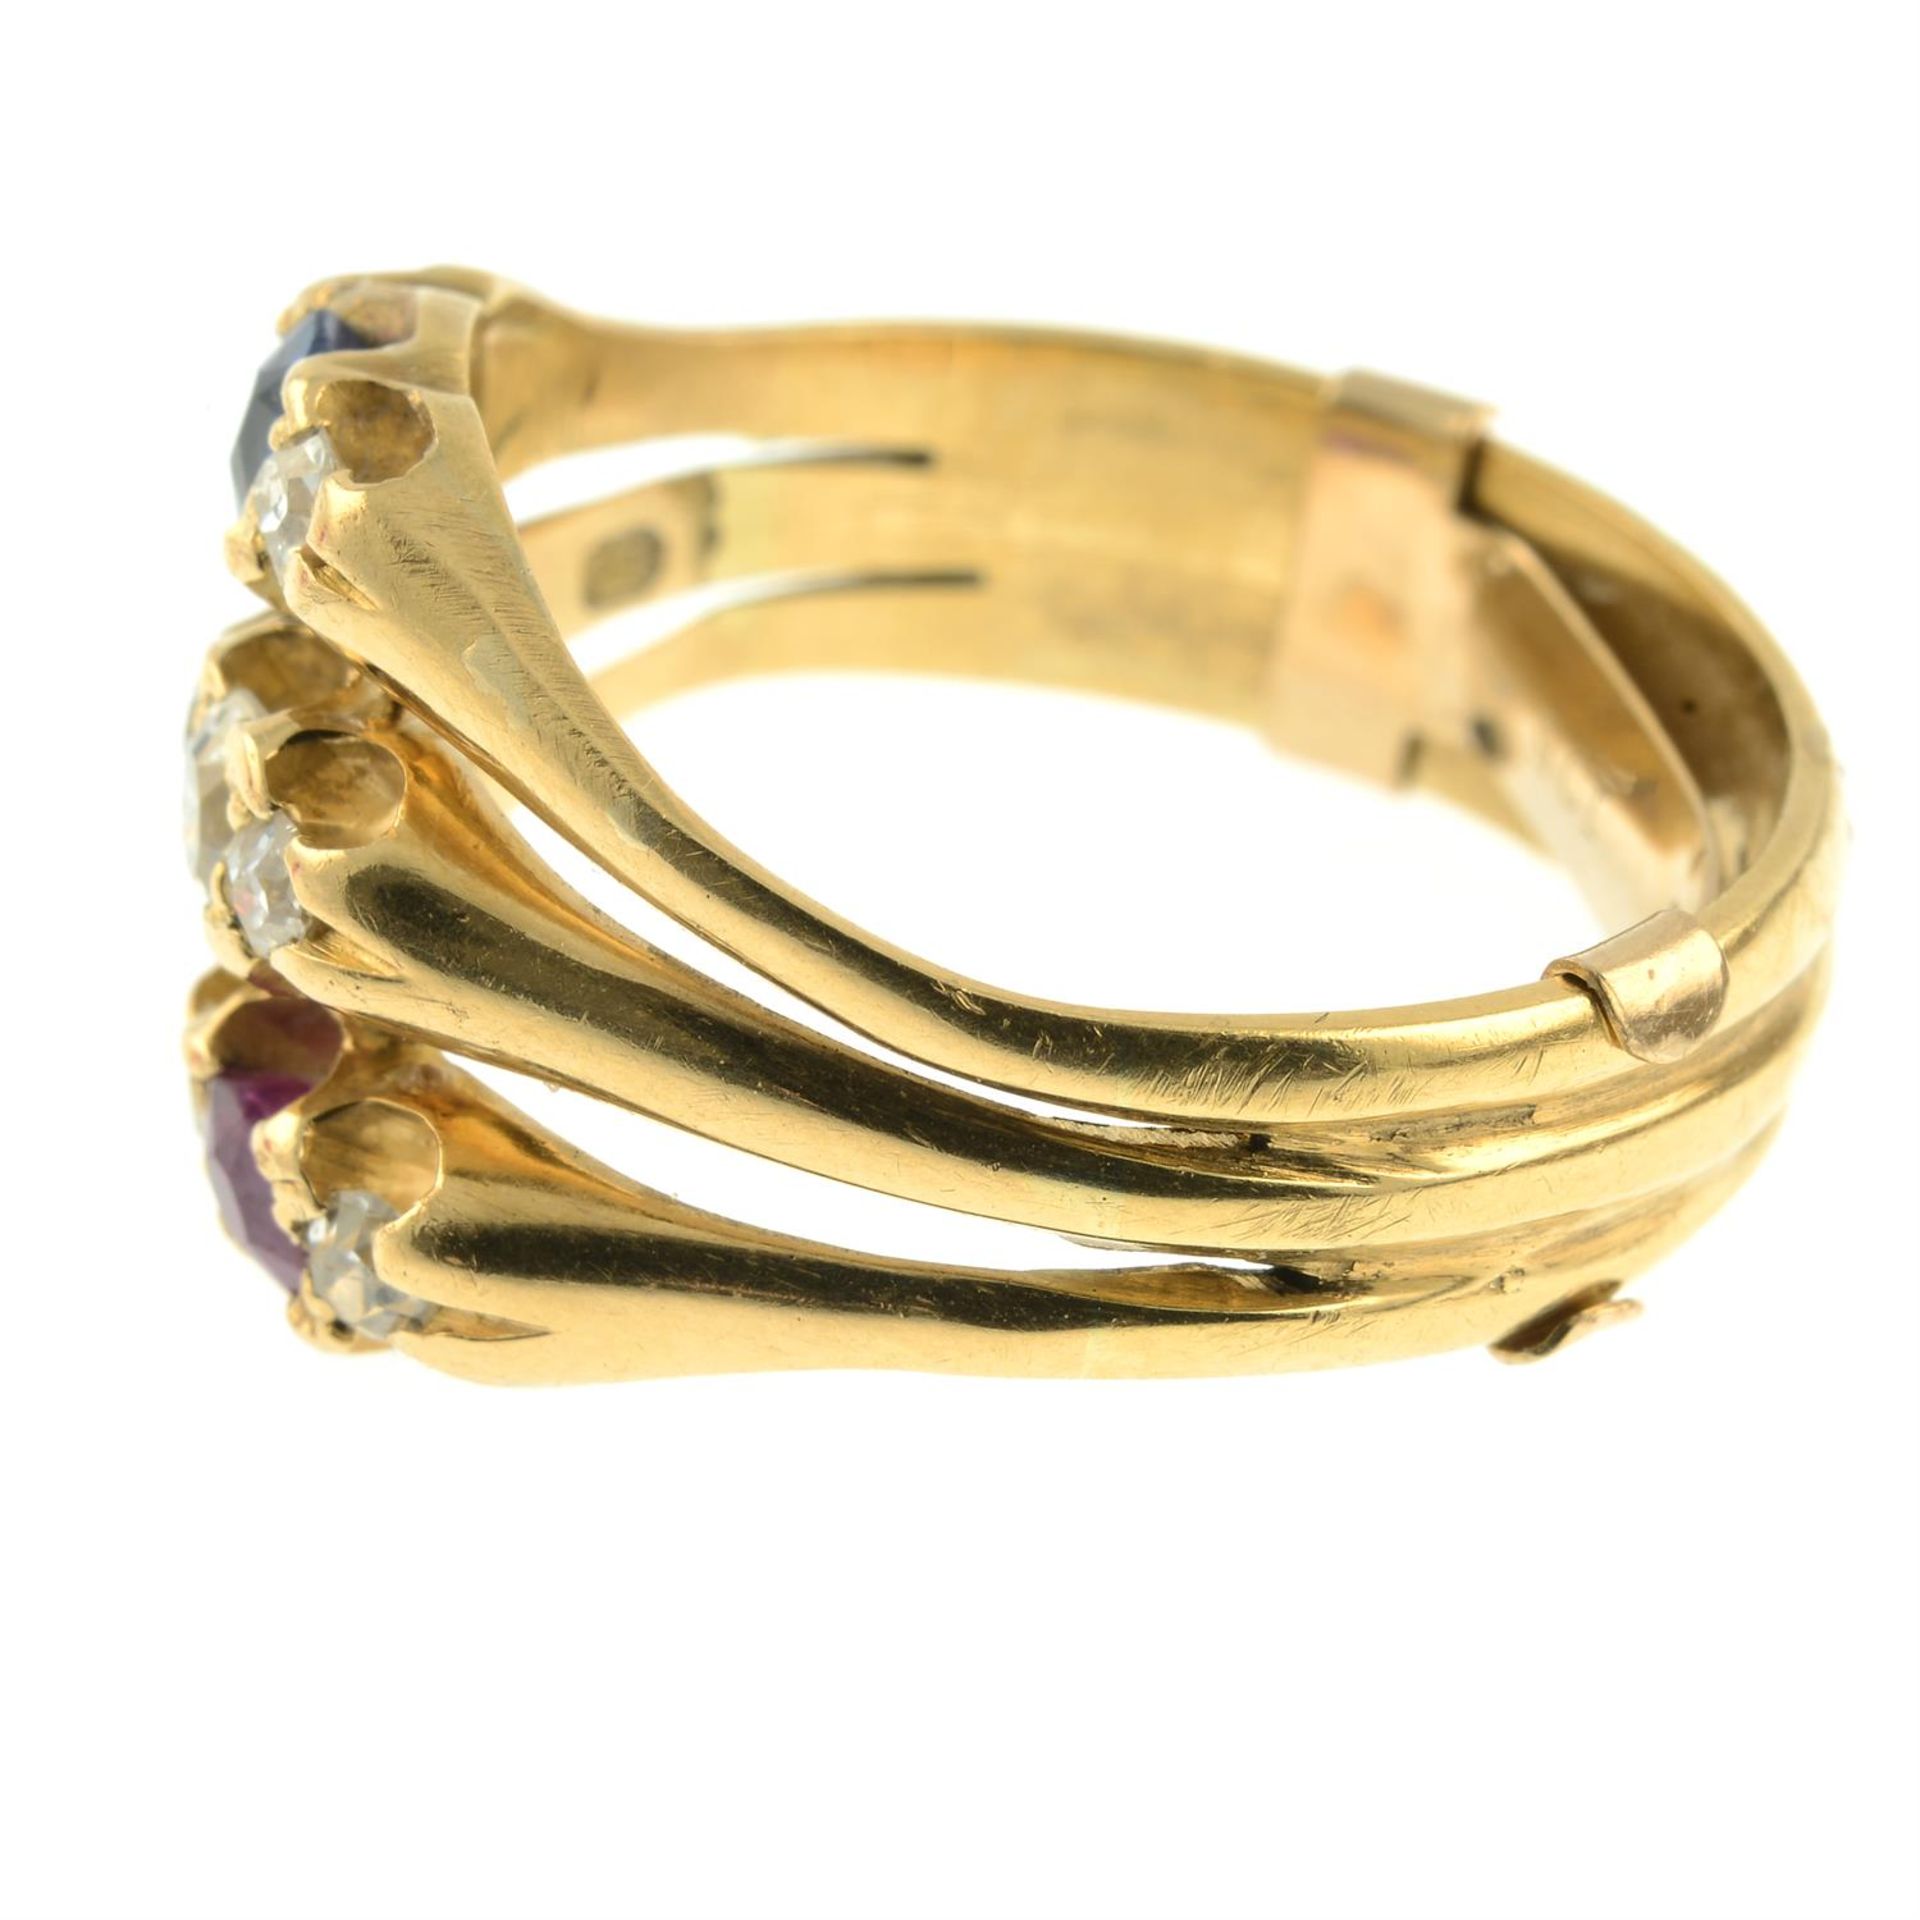 An early 20th century 18ct gold ruby, diamond and sapphire patriotic ring. - Image 3 of 5